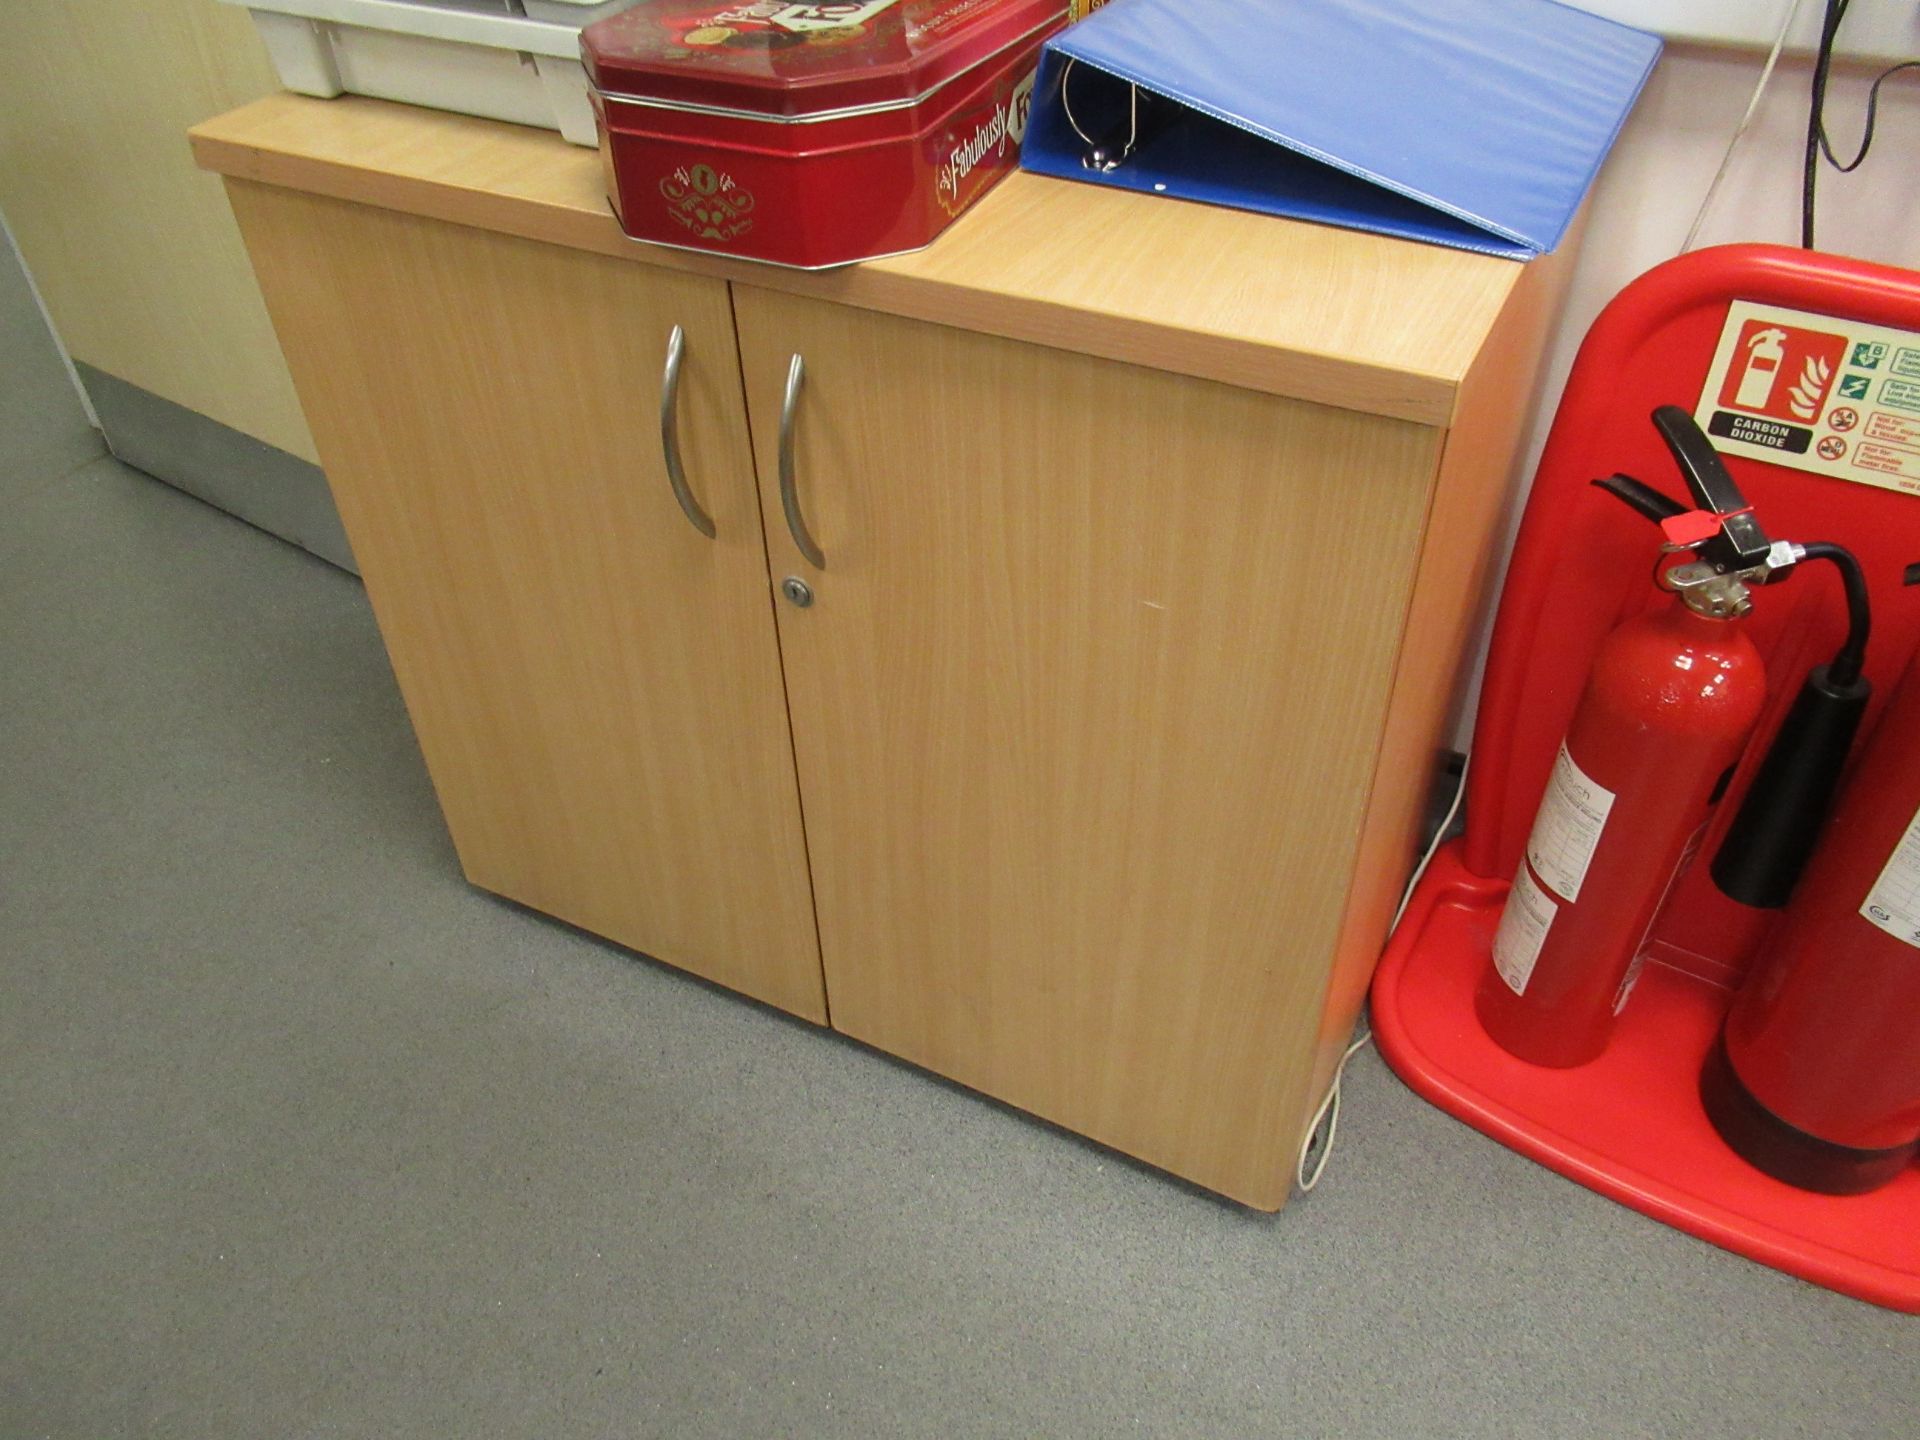 Content of the office desks, 5 x various office desks, 5 x mobile chairs, 2 x tambour fronted cupboa - Image 8 of 9